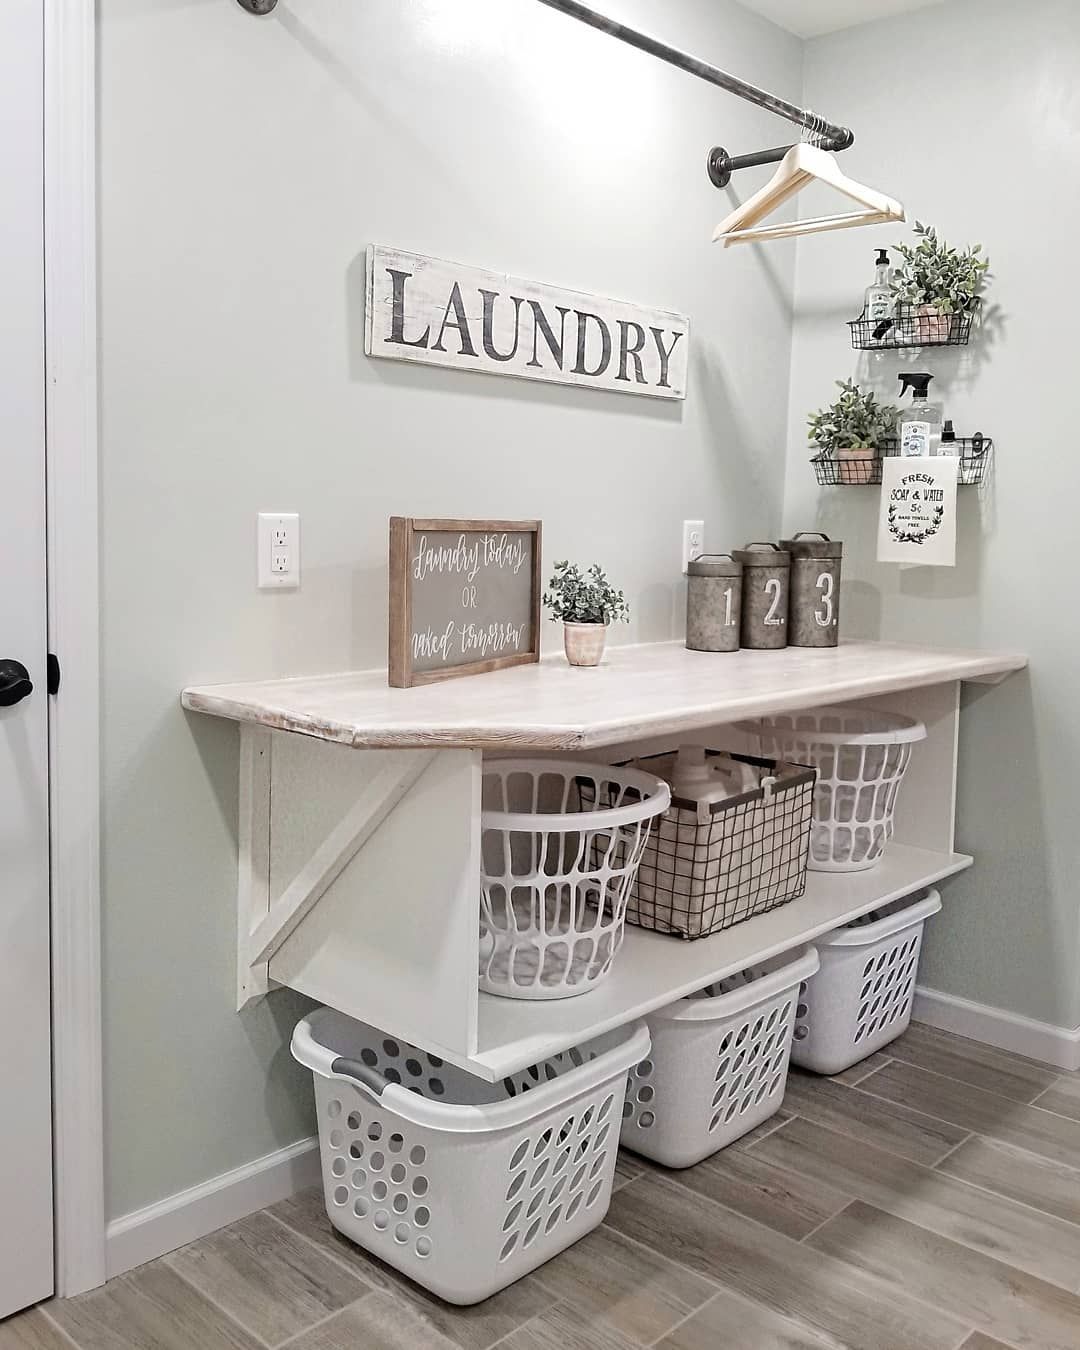 20 Brilliant Laundry Room Ideas for Small Spaces - Practical & Efficient